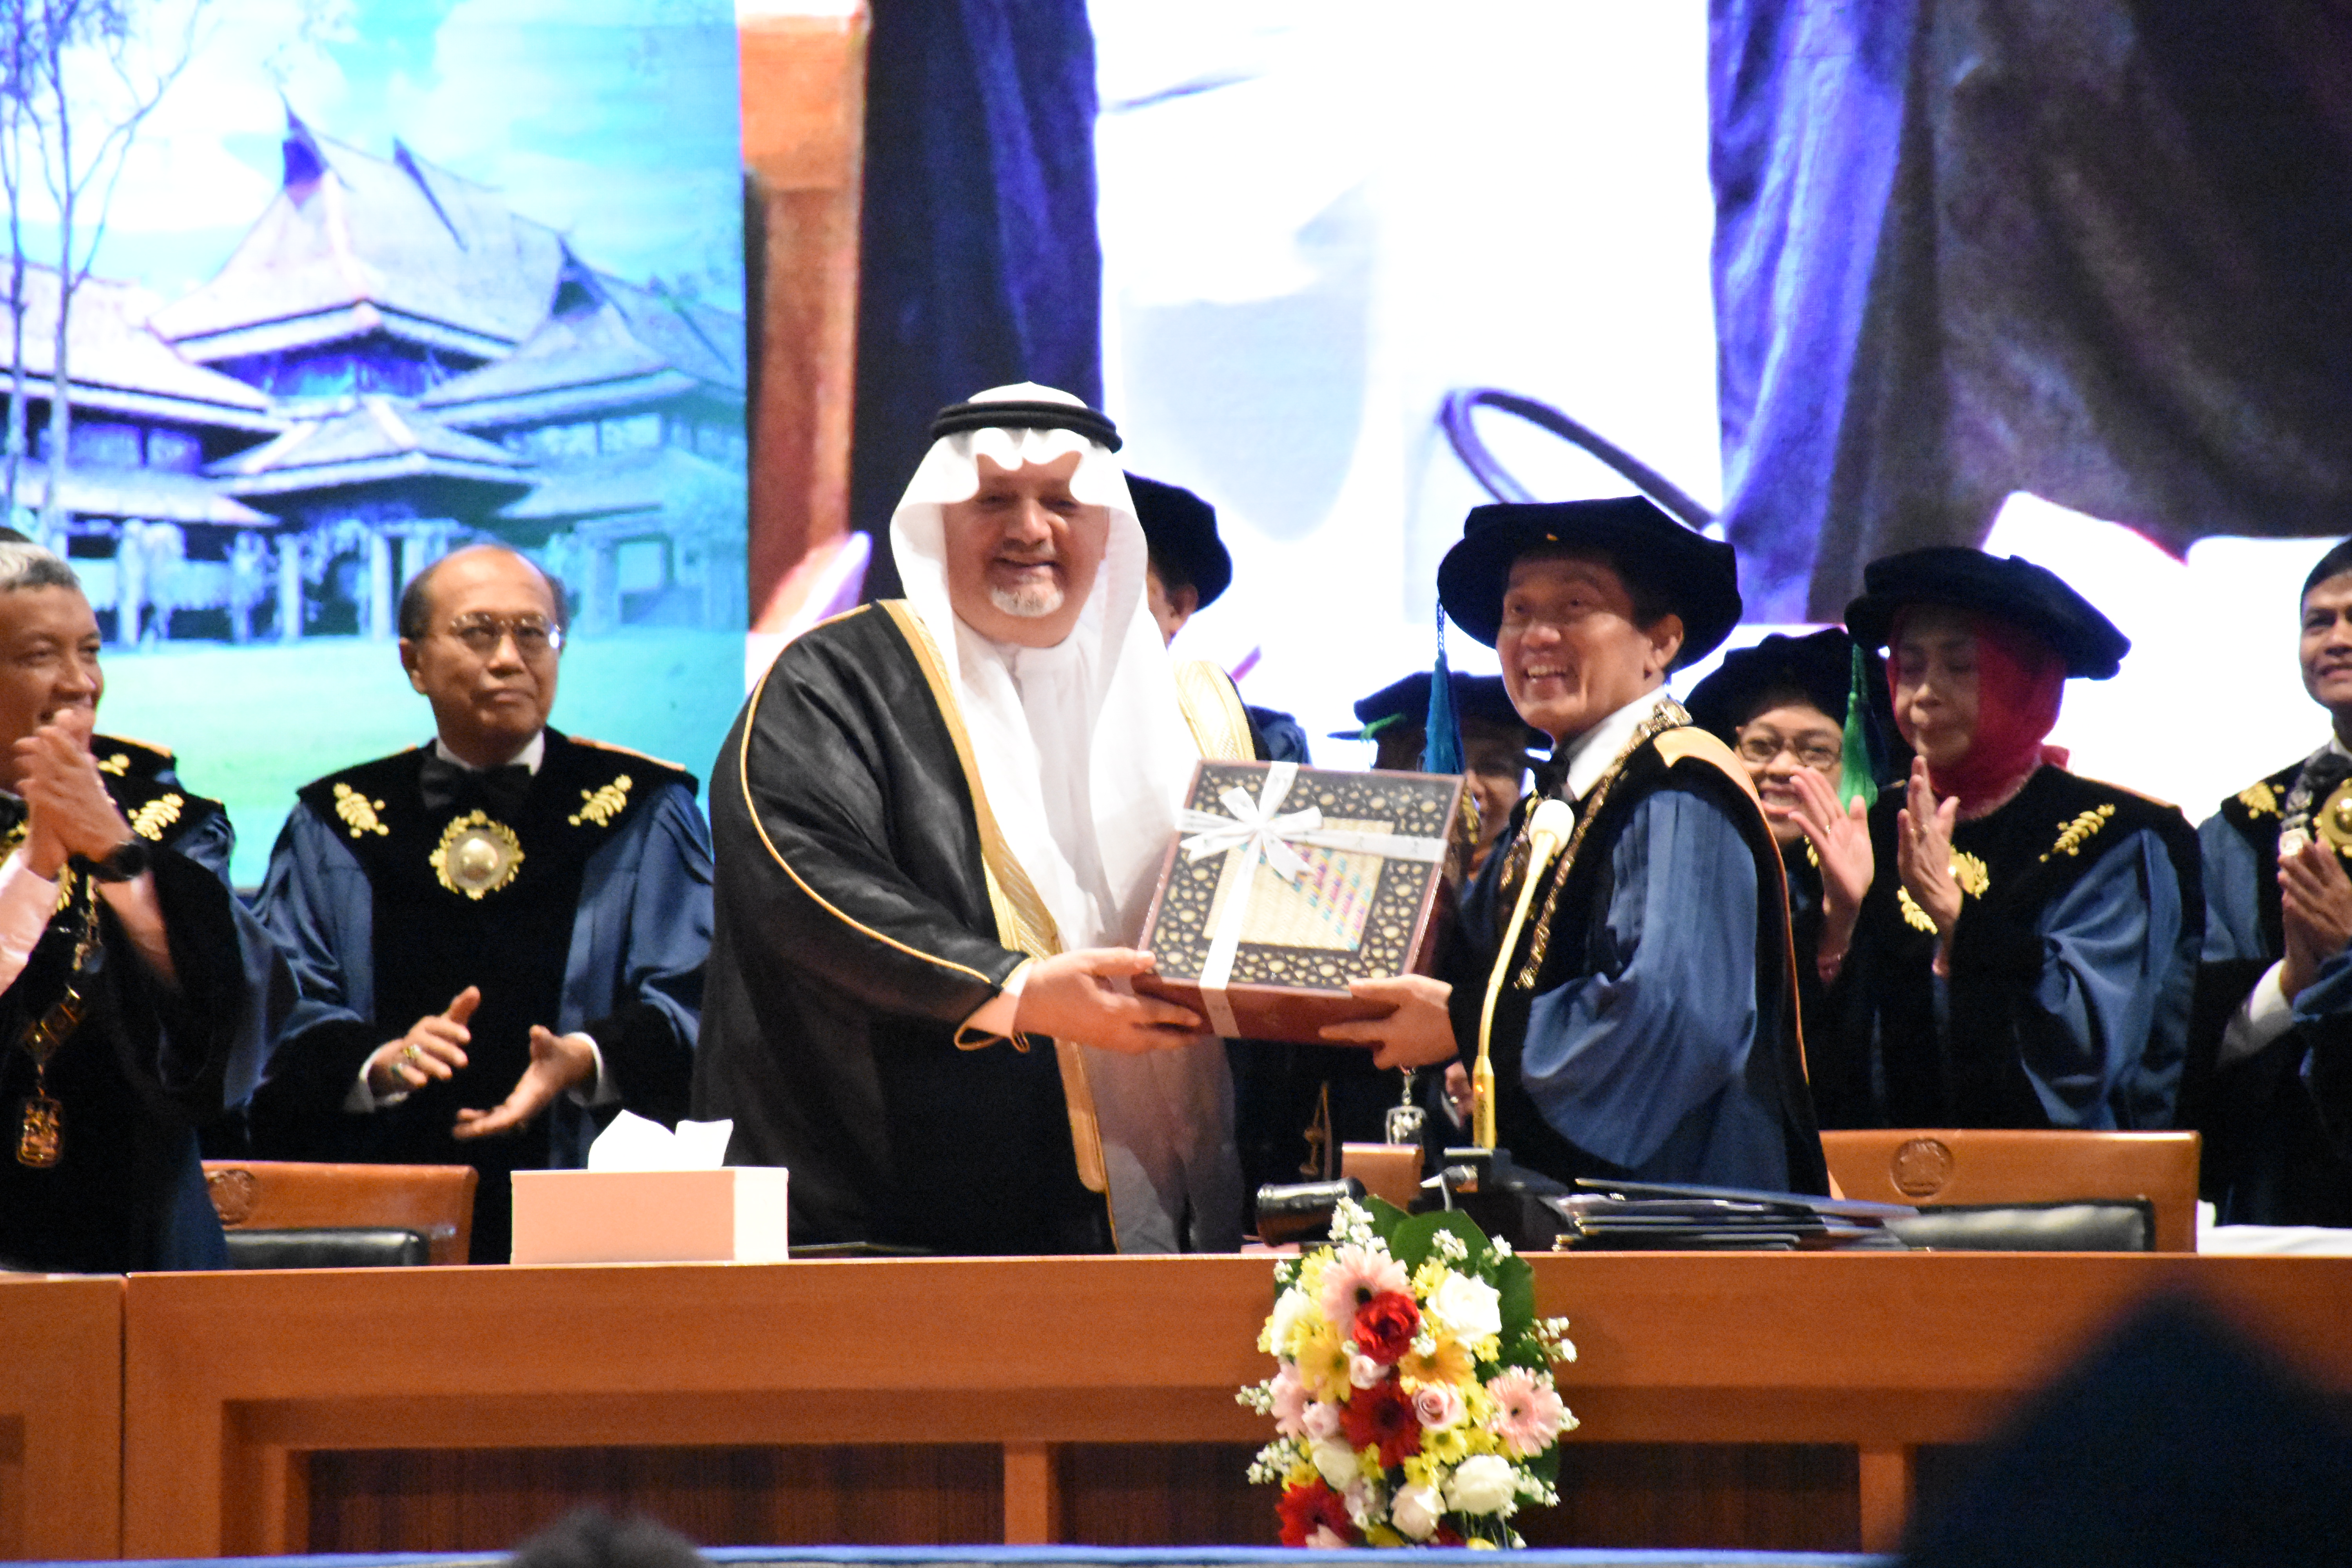 he-ambassador-of-the-kingdom-of-saudi-arabia-to-indonesia-delivered-commencement-speech-on-itbs-graduation-ceremony